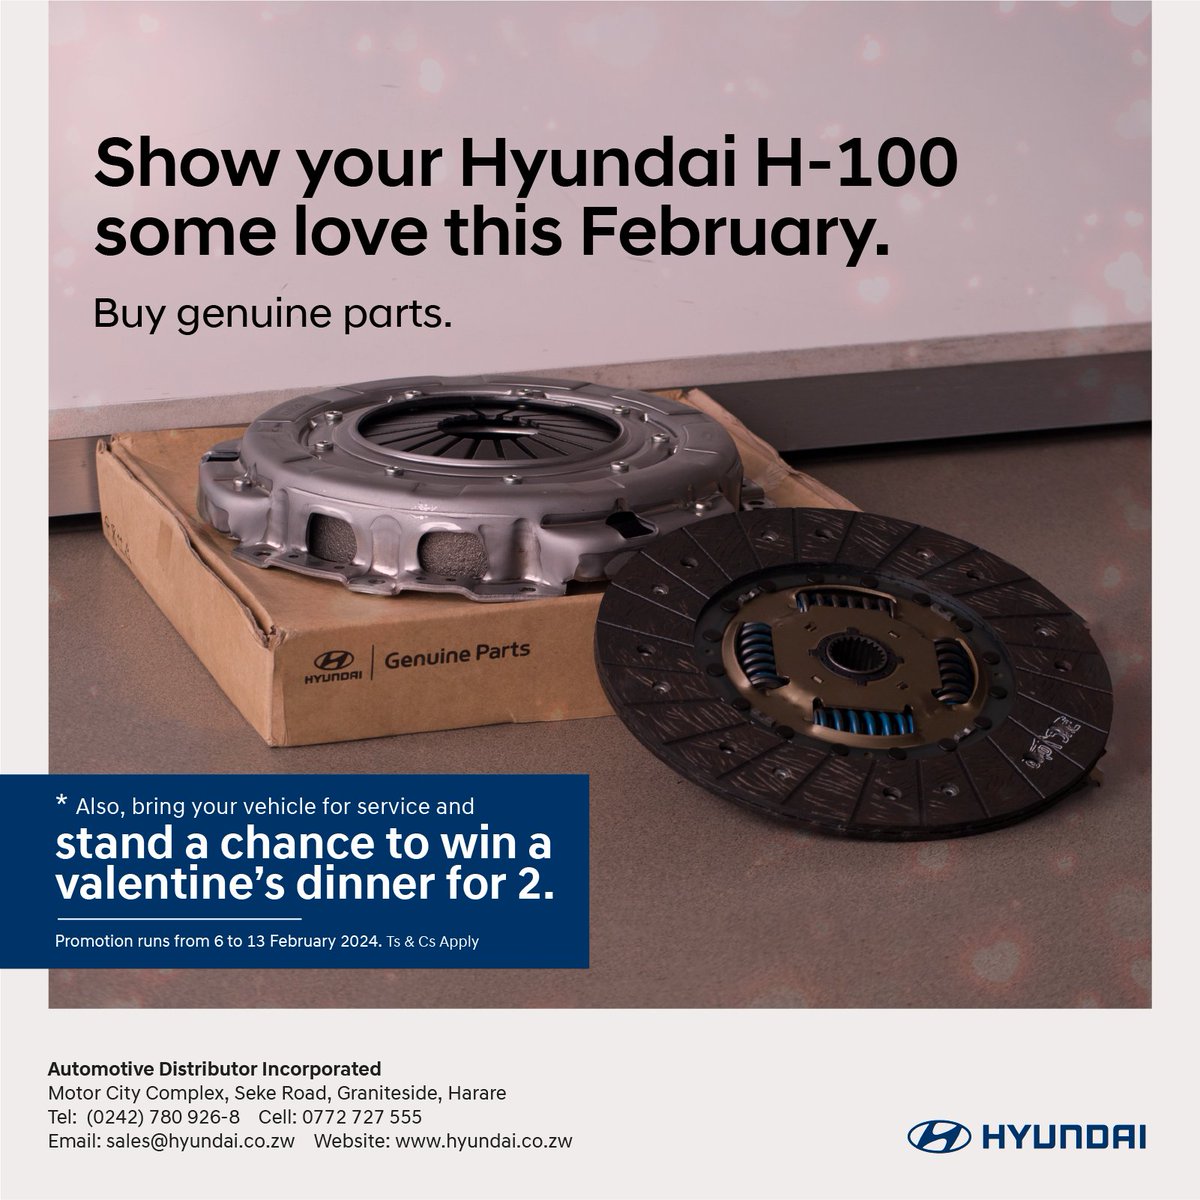 Show your vehicle some love this month with Hyundai Genuine Parts. Remember, when you buy genuine; you buy peace of mind. #hyundaigenuineparts #showsomelove